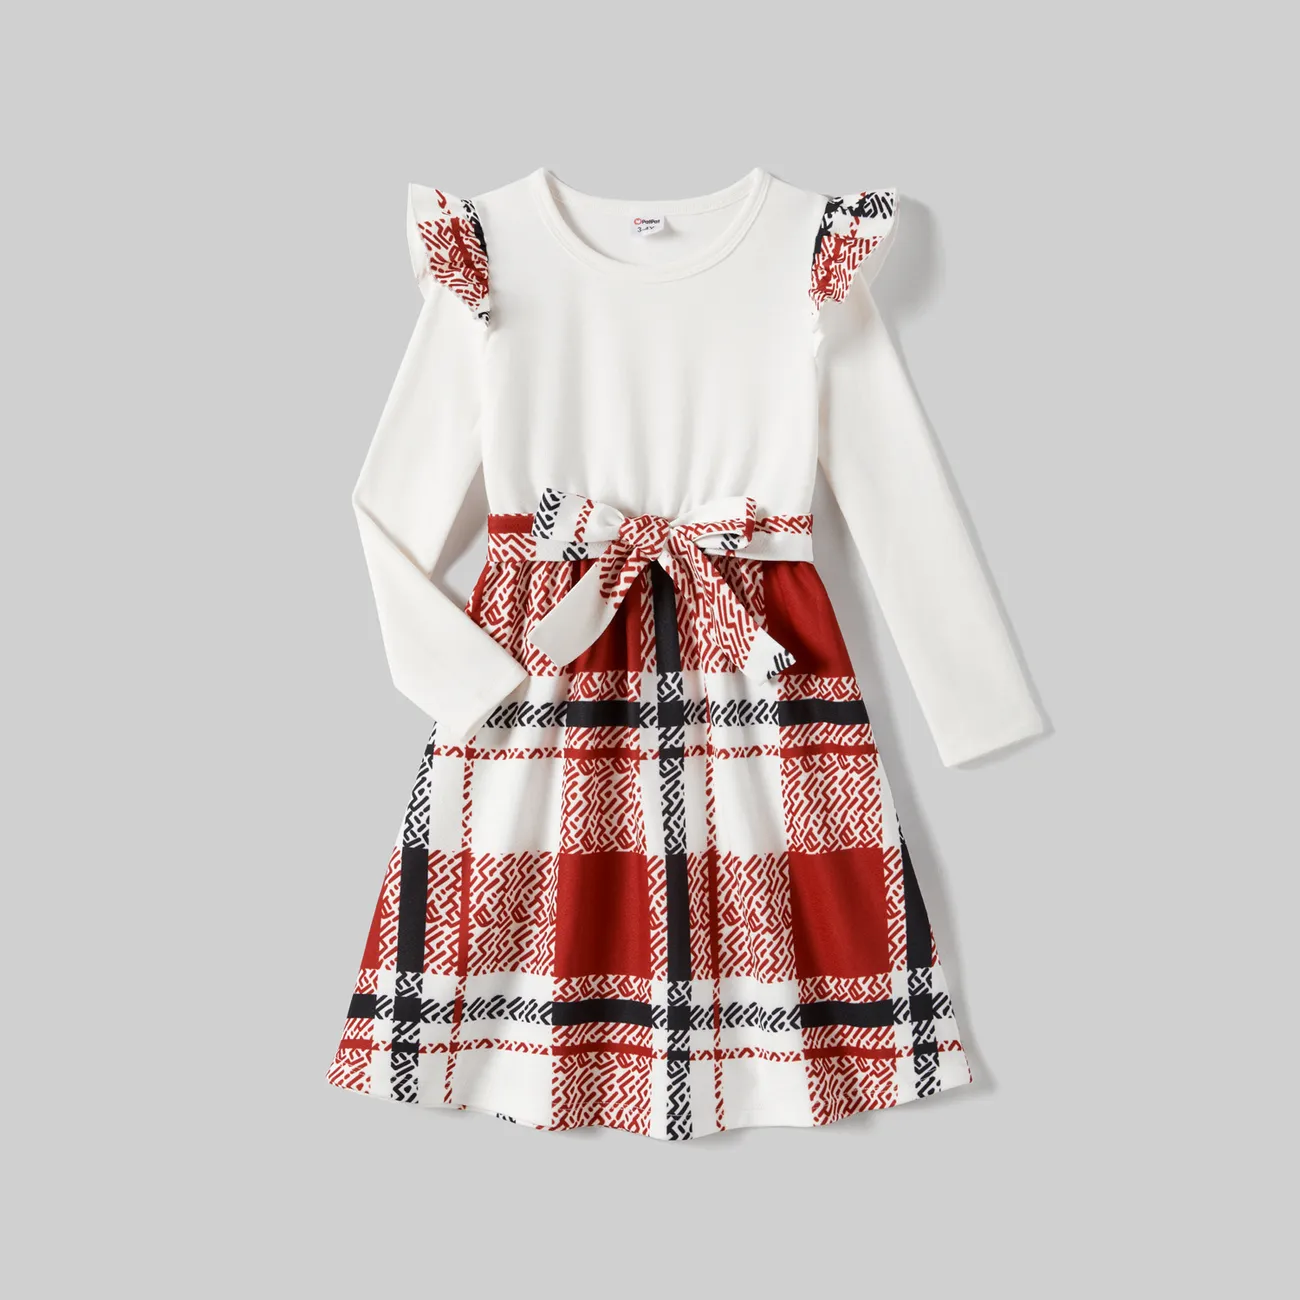 Family Matching Casual Long-sleeve Color-block Tops & Grid/Houndstooth Belted Dresses Sets  White big image 1